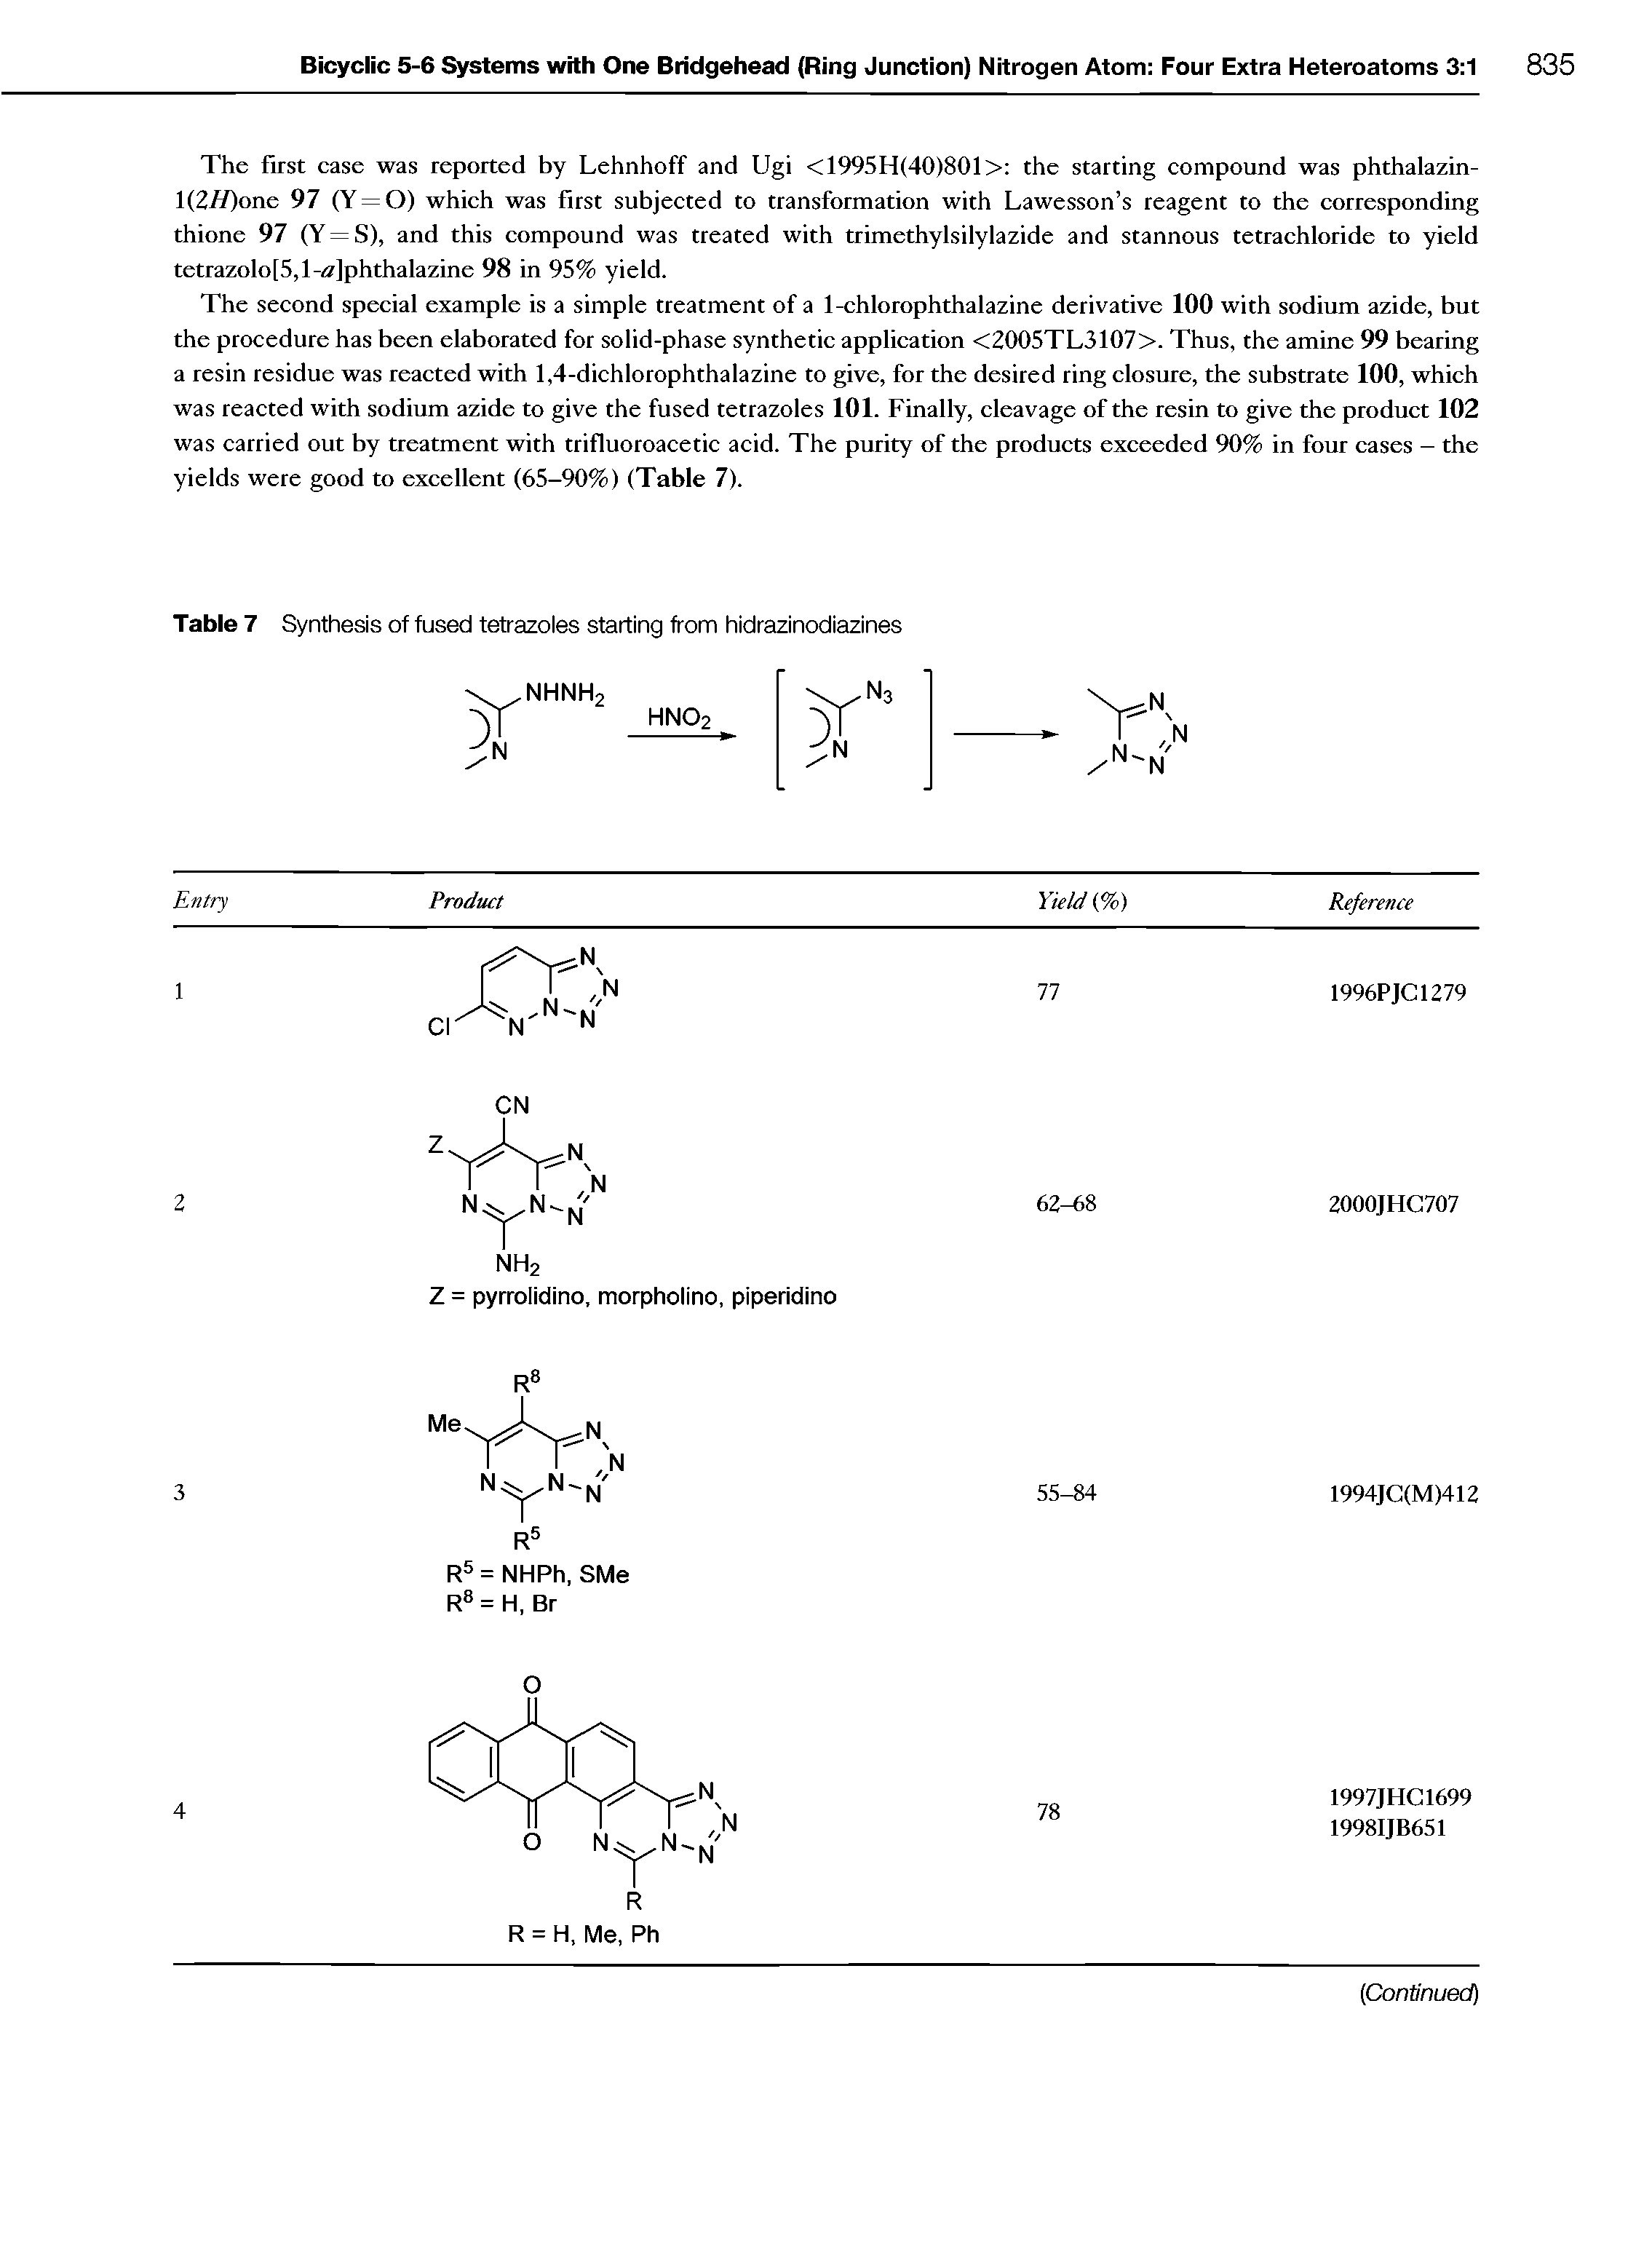 Table 7 Synthesis of fused tetrazoles starting from hidrazinodiazines...